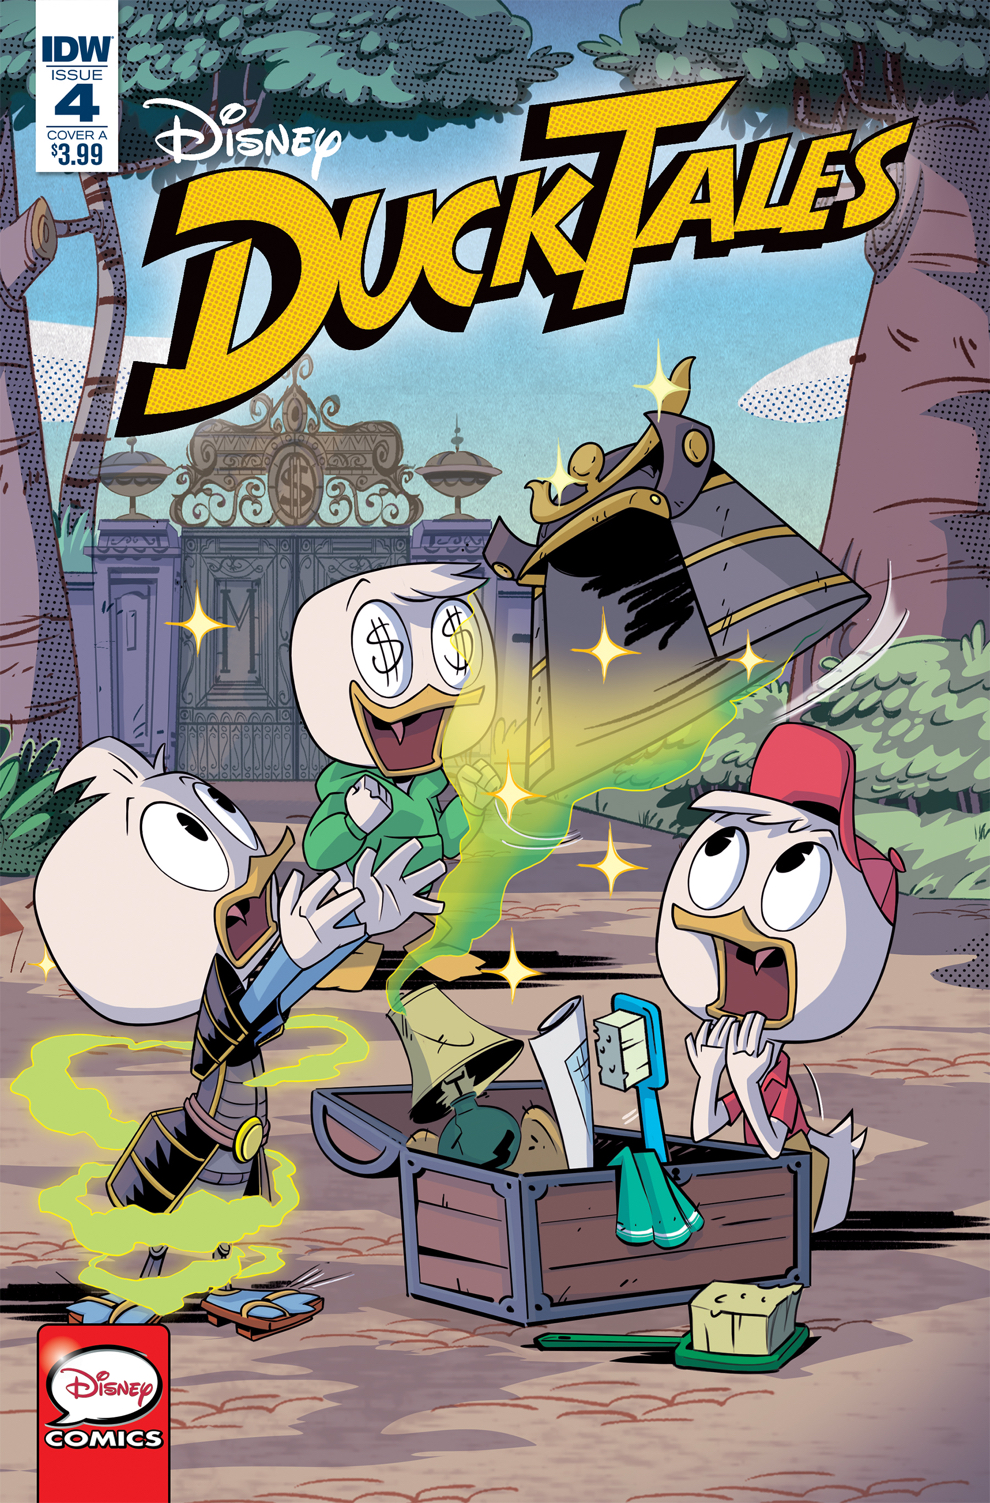 DuckTales - Issue 4 - Cover A